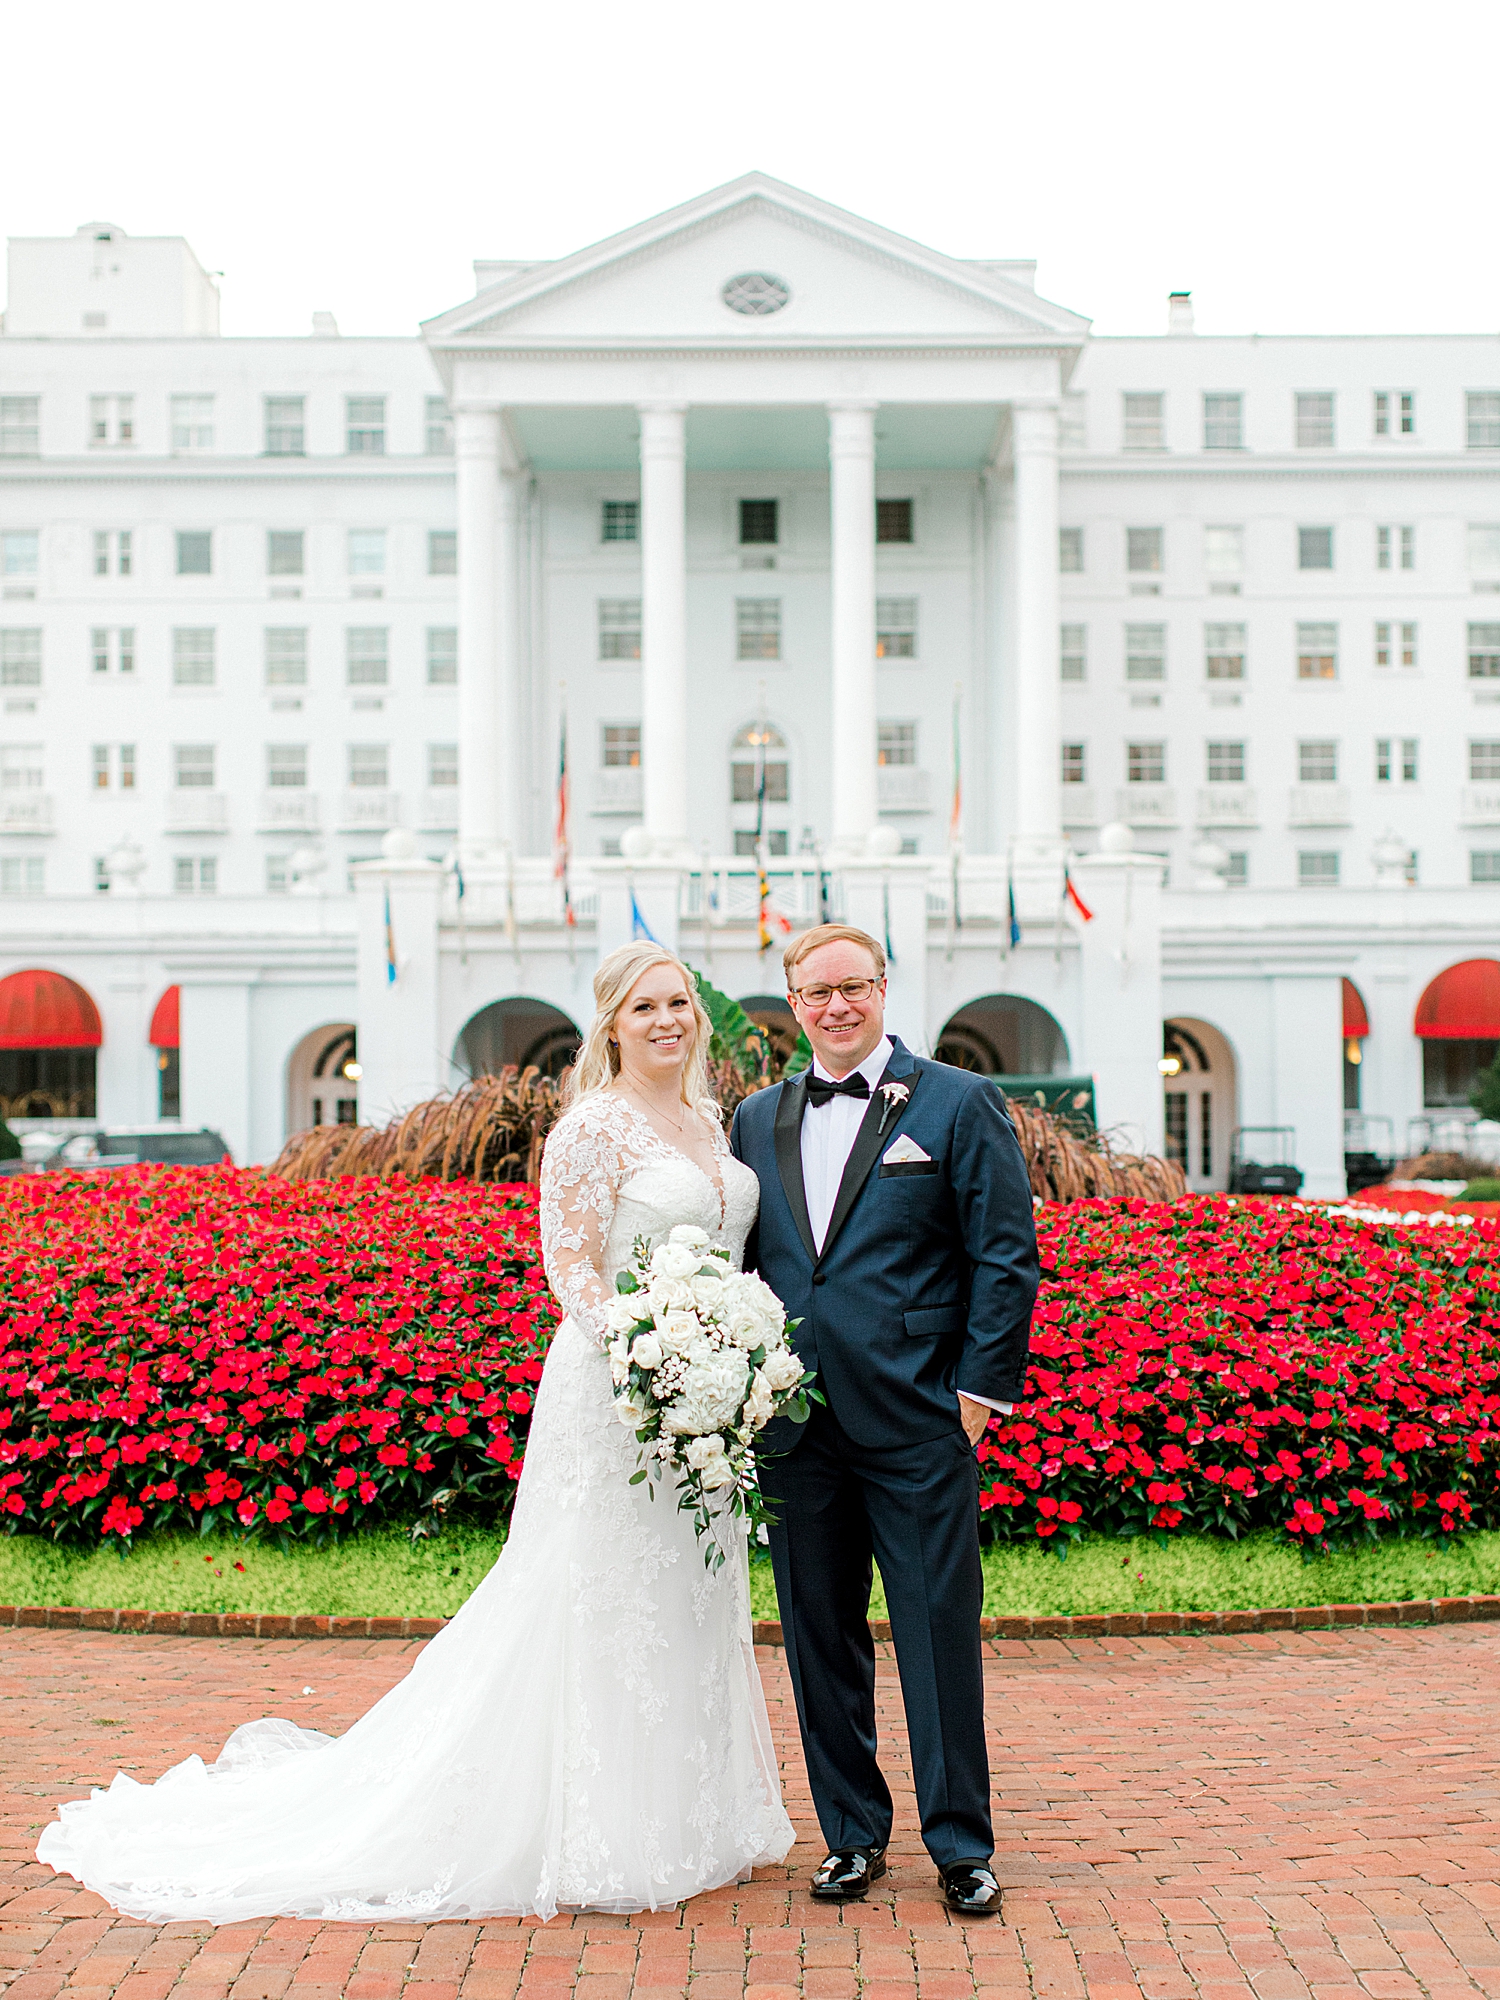 Wedding couple at The Greenbrier.